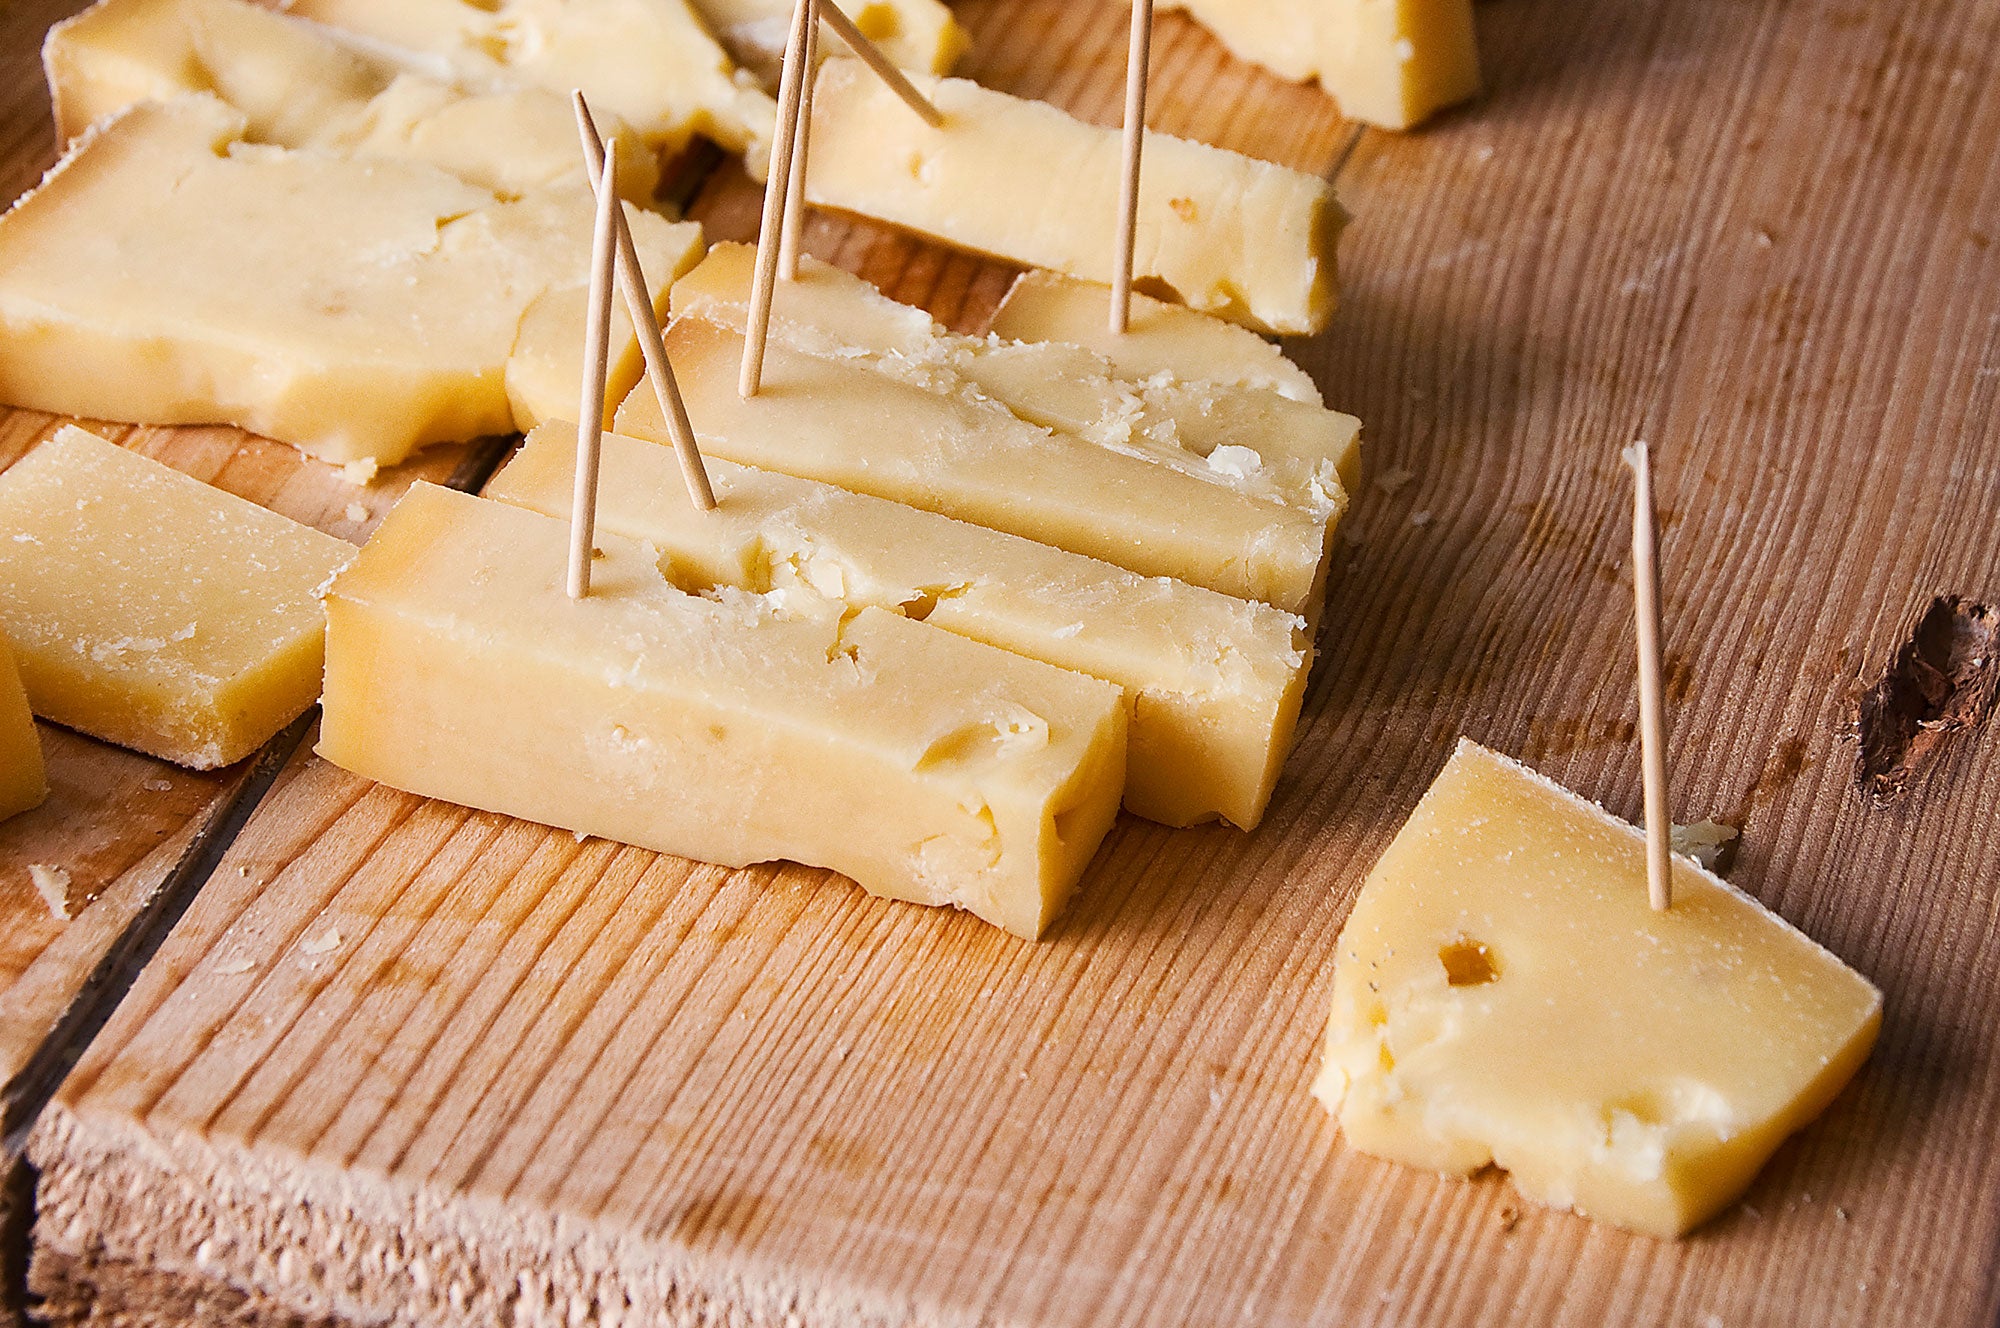 US-made cheese can also be called 'gruyere', court rules